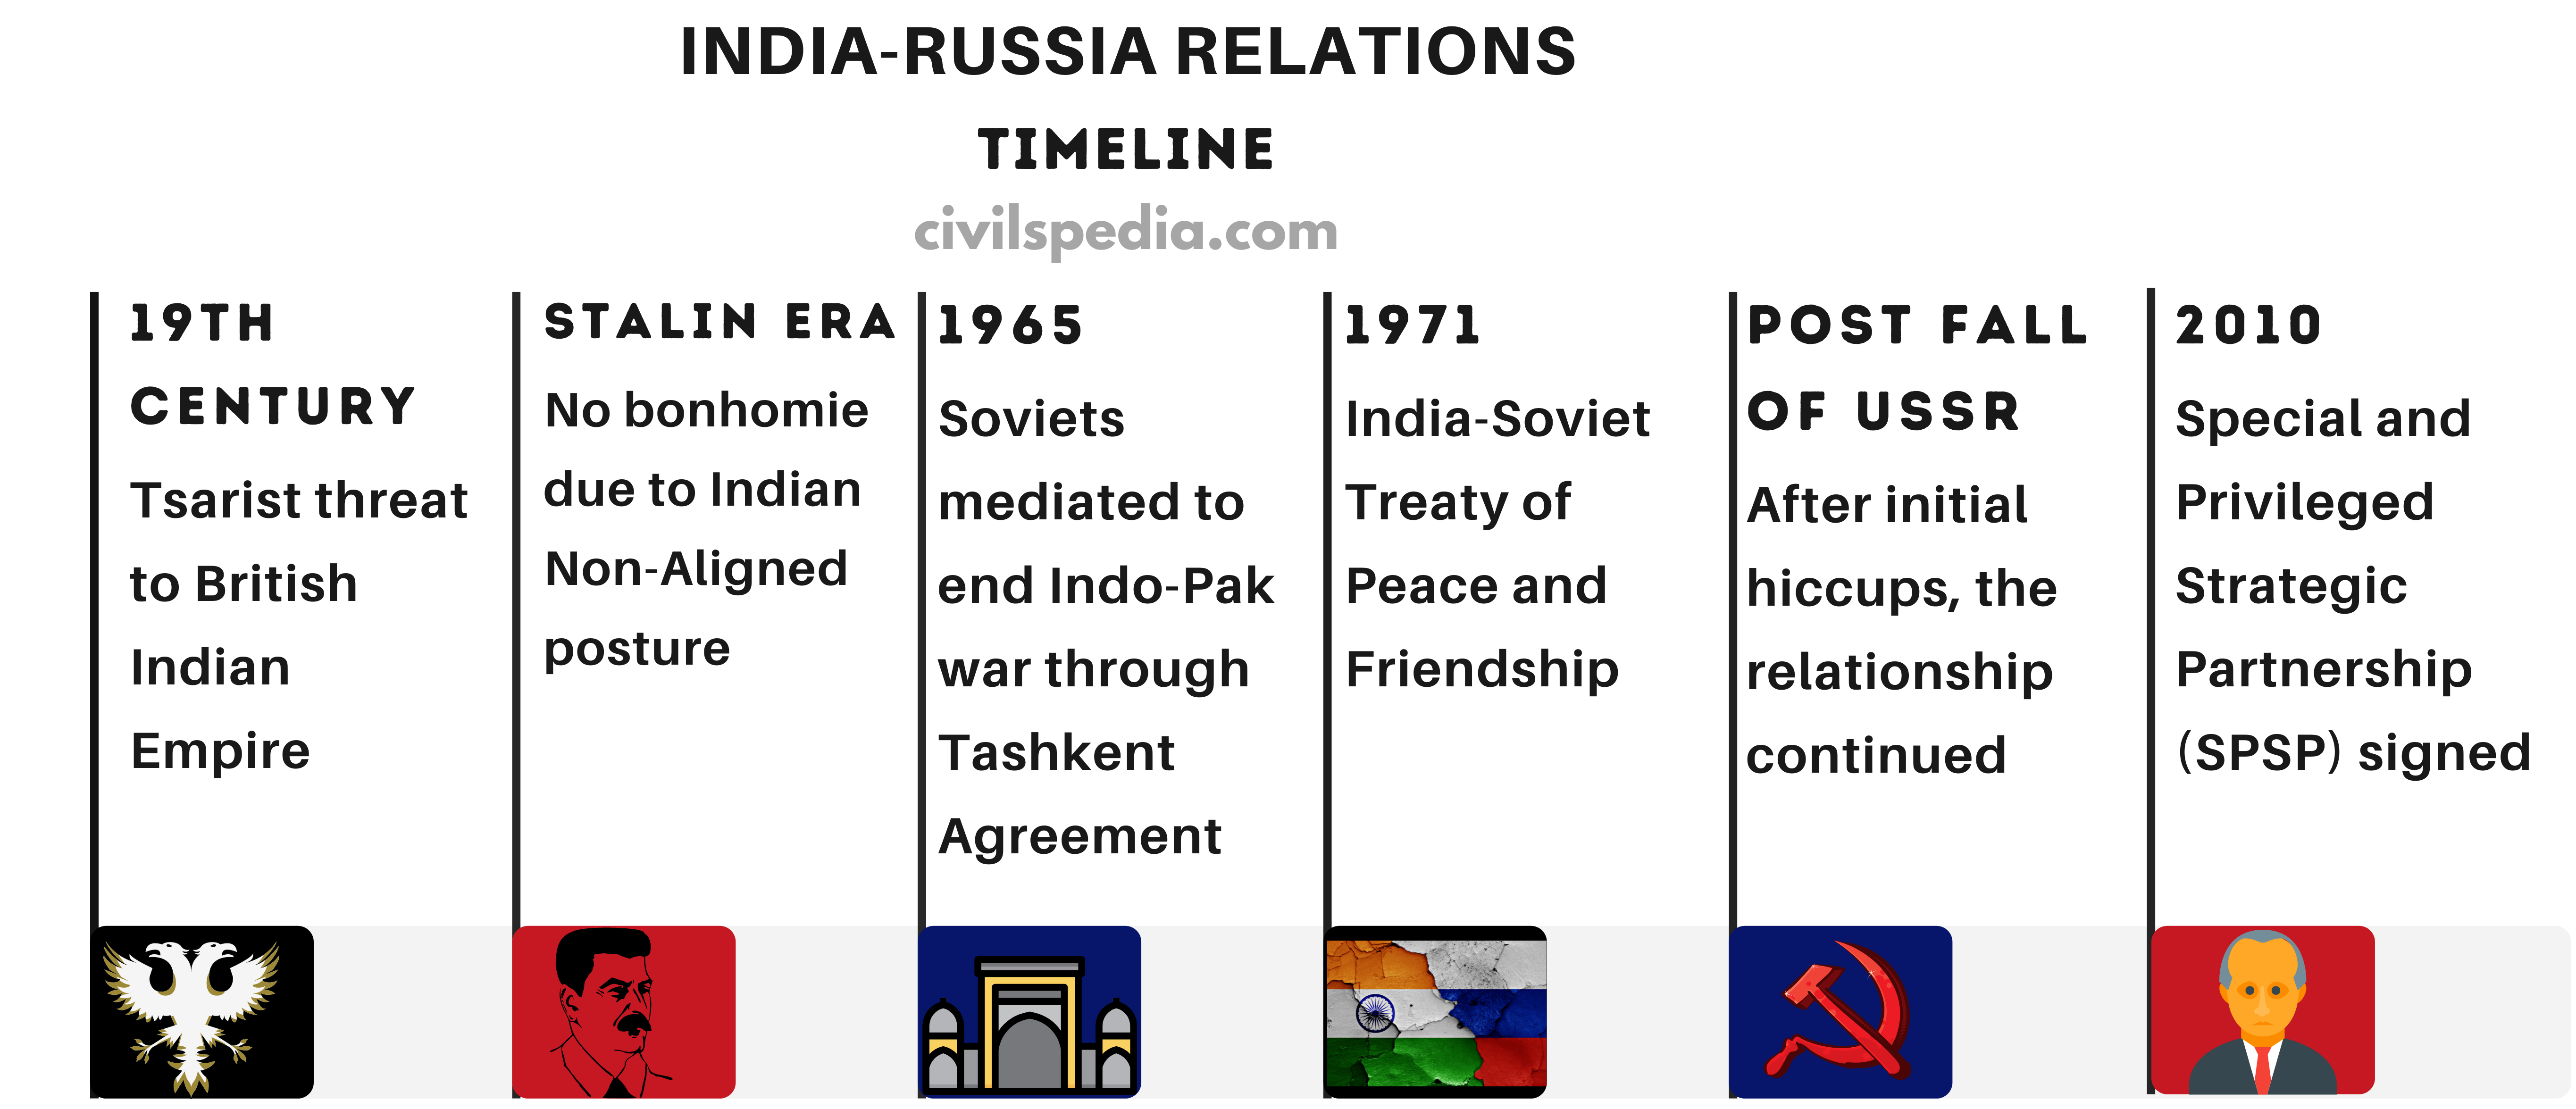 Timeline of India-Russia Relations